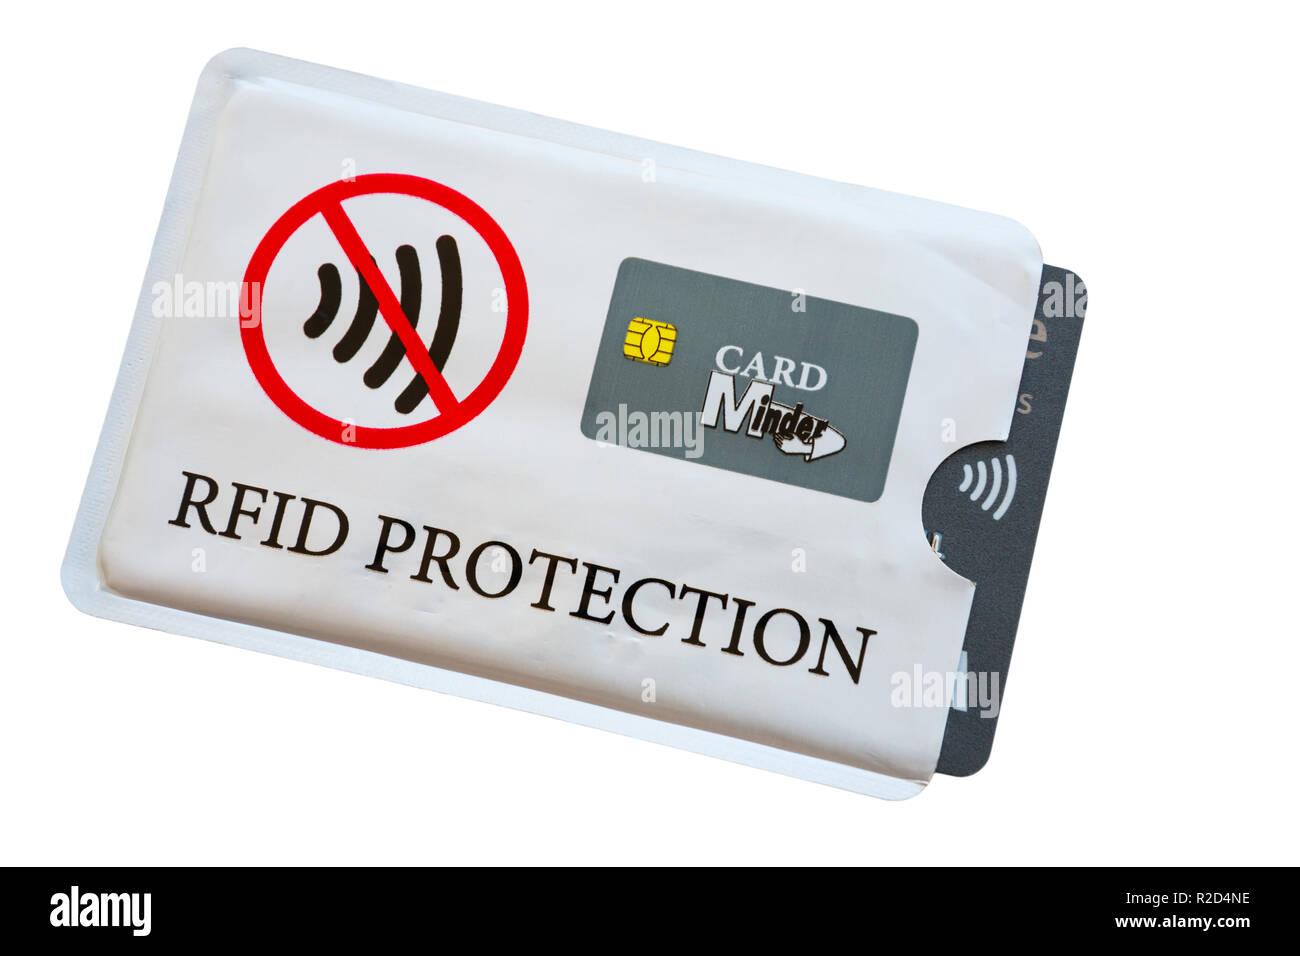 Card Minder RFID Radio-frequency identification blocker electromagnetically  opaque sleeve for protecting a contactless bankcard against skimming UK  Stock Photo - Alamy